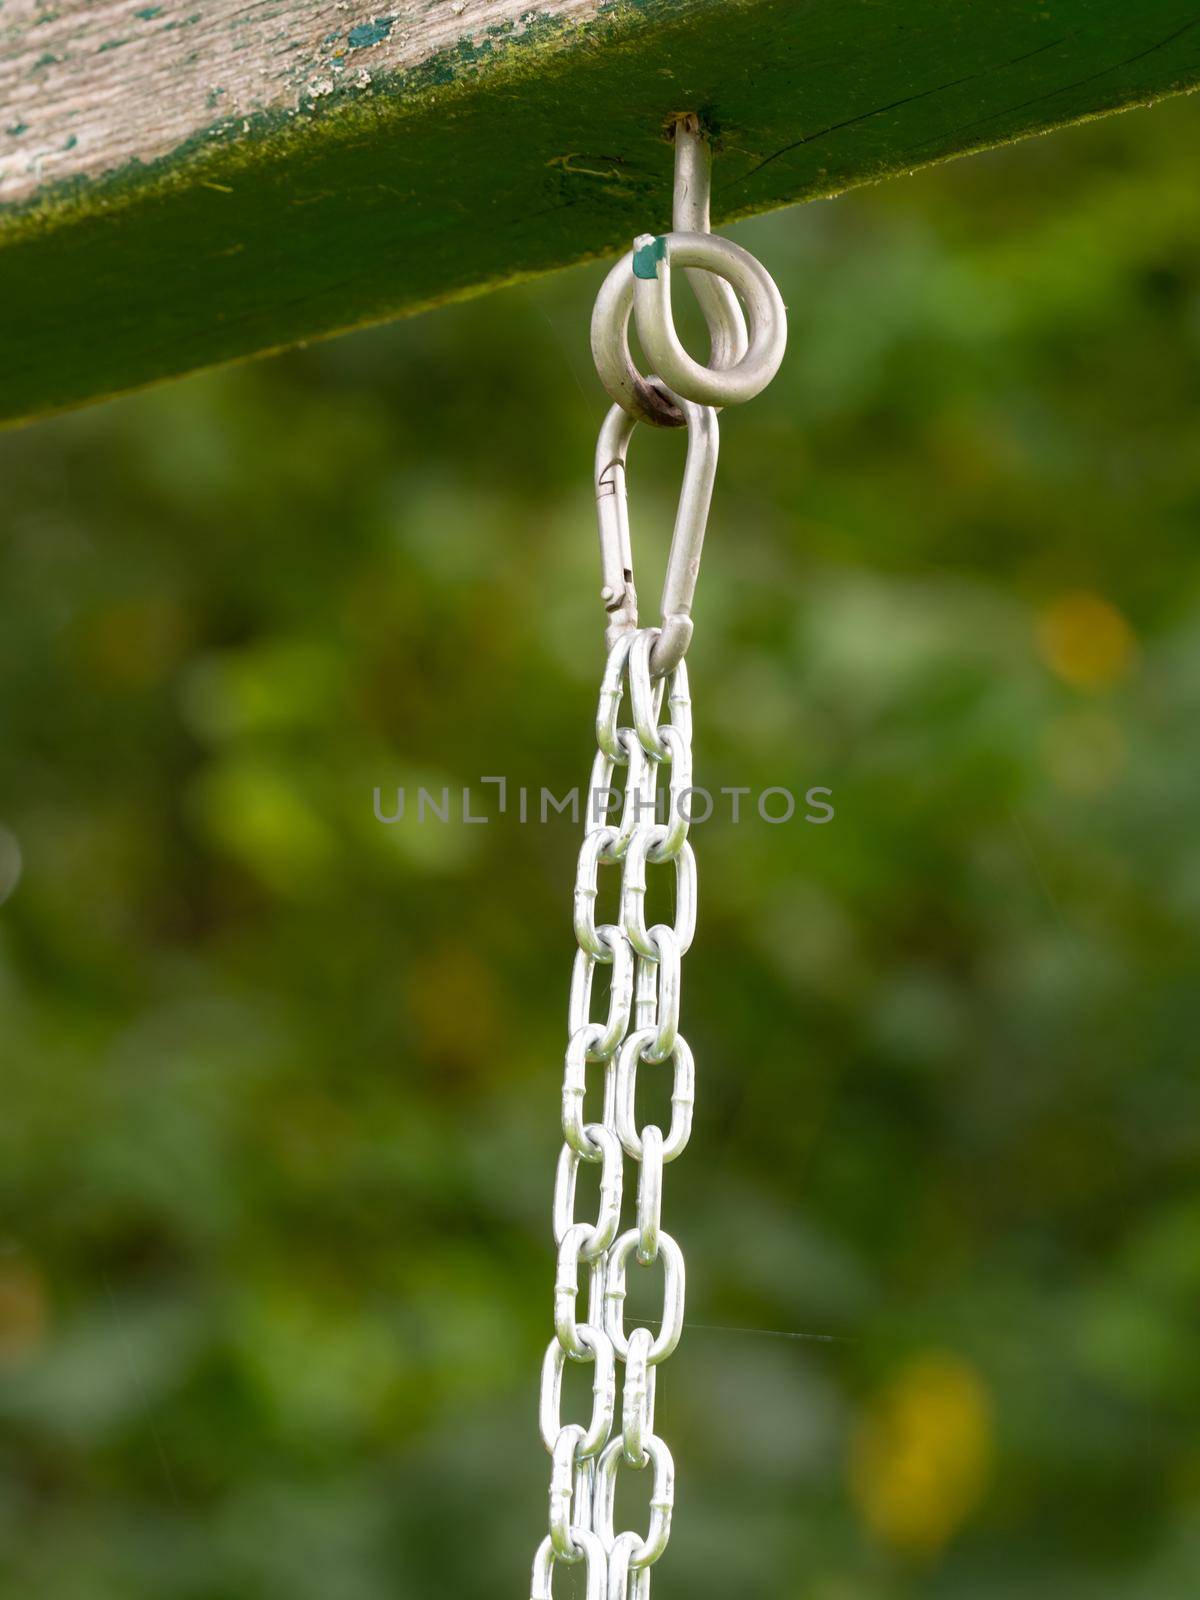 Rope ring knot hanging on wooden beam, trees in blurry background